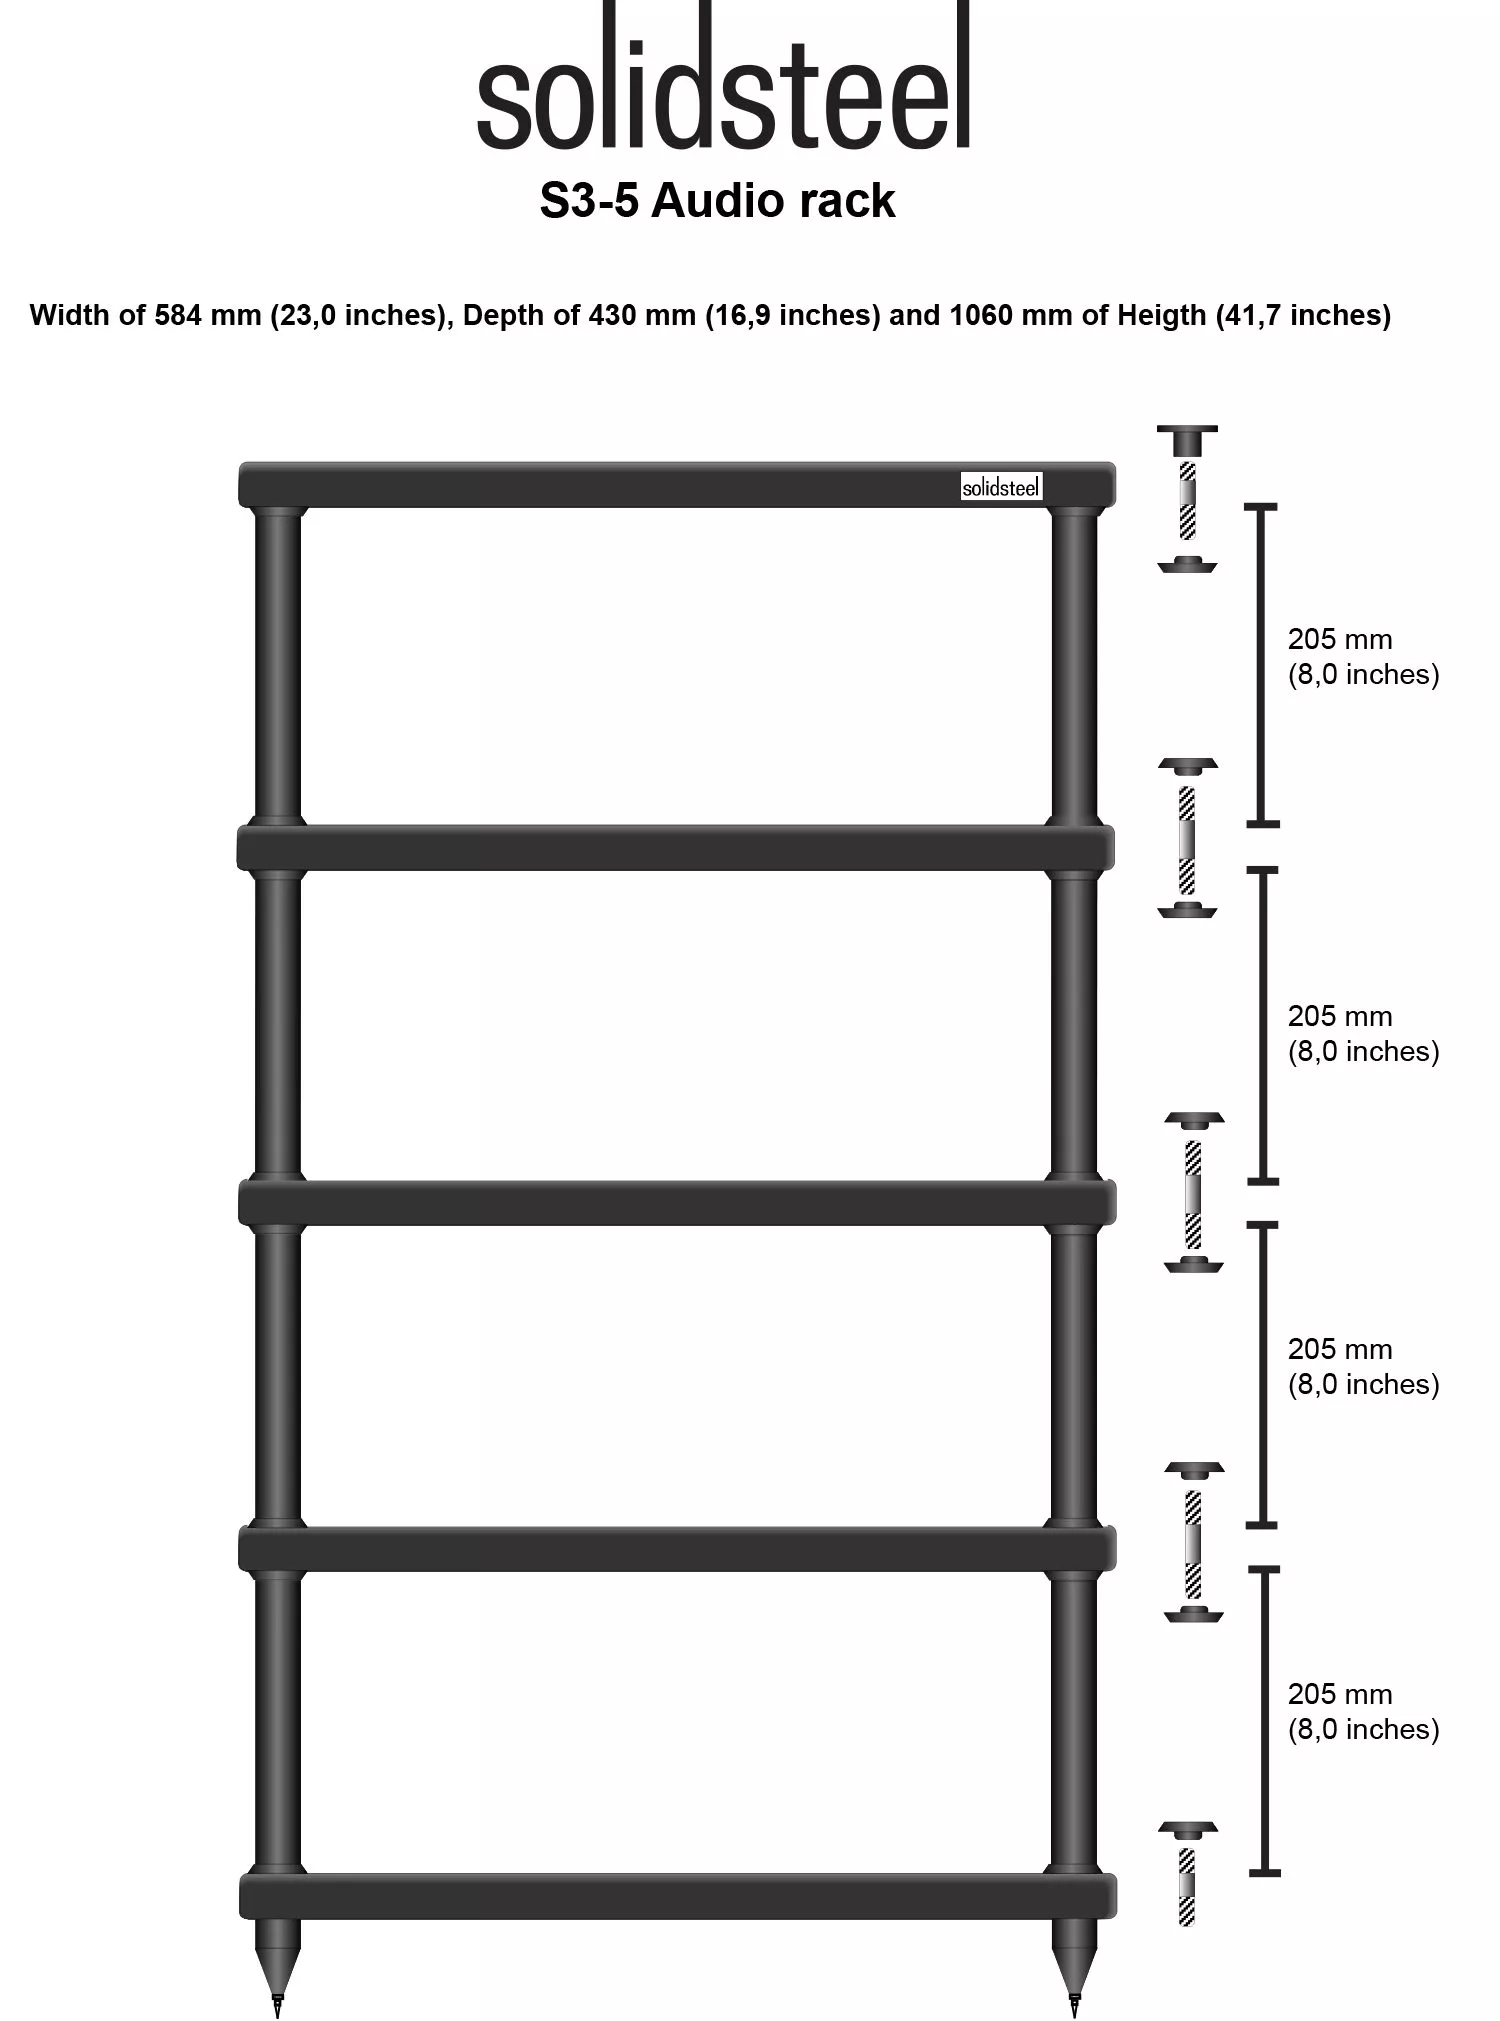  Solidsteel S3-5 taille dimensions rack